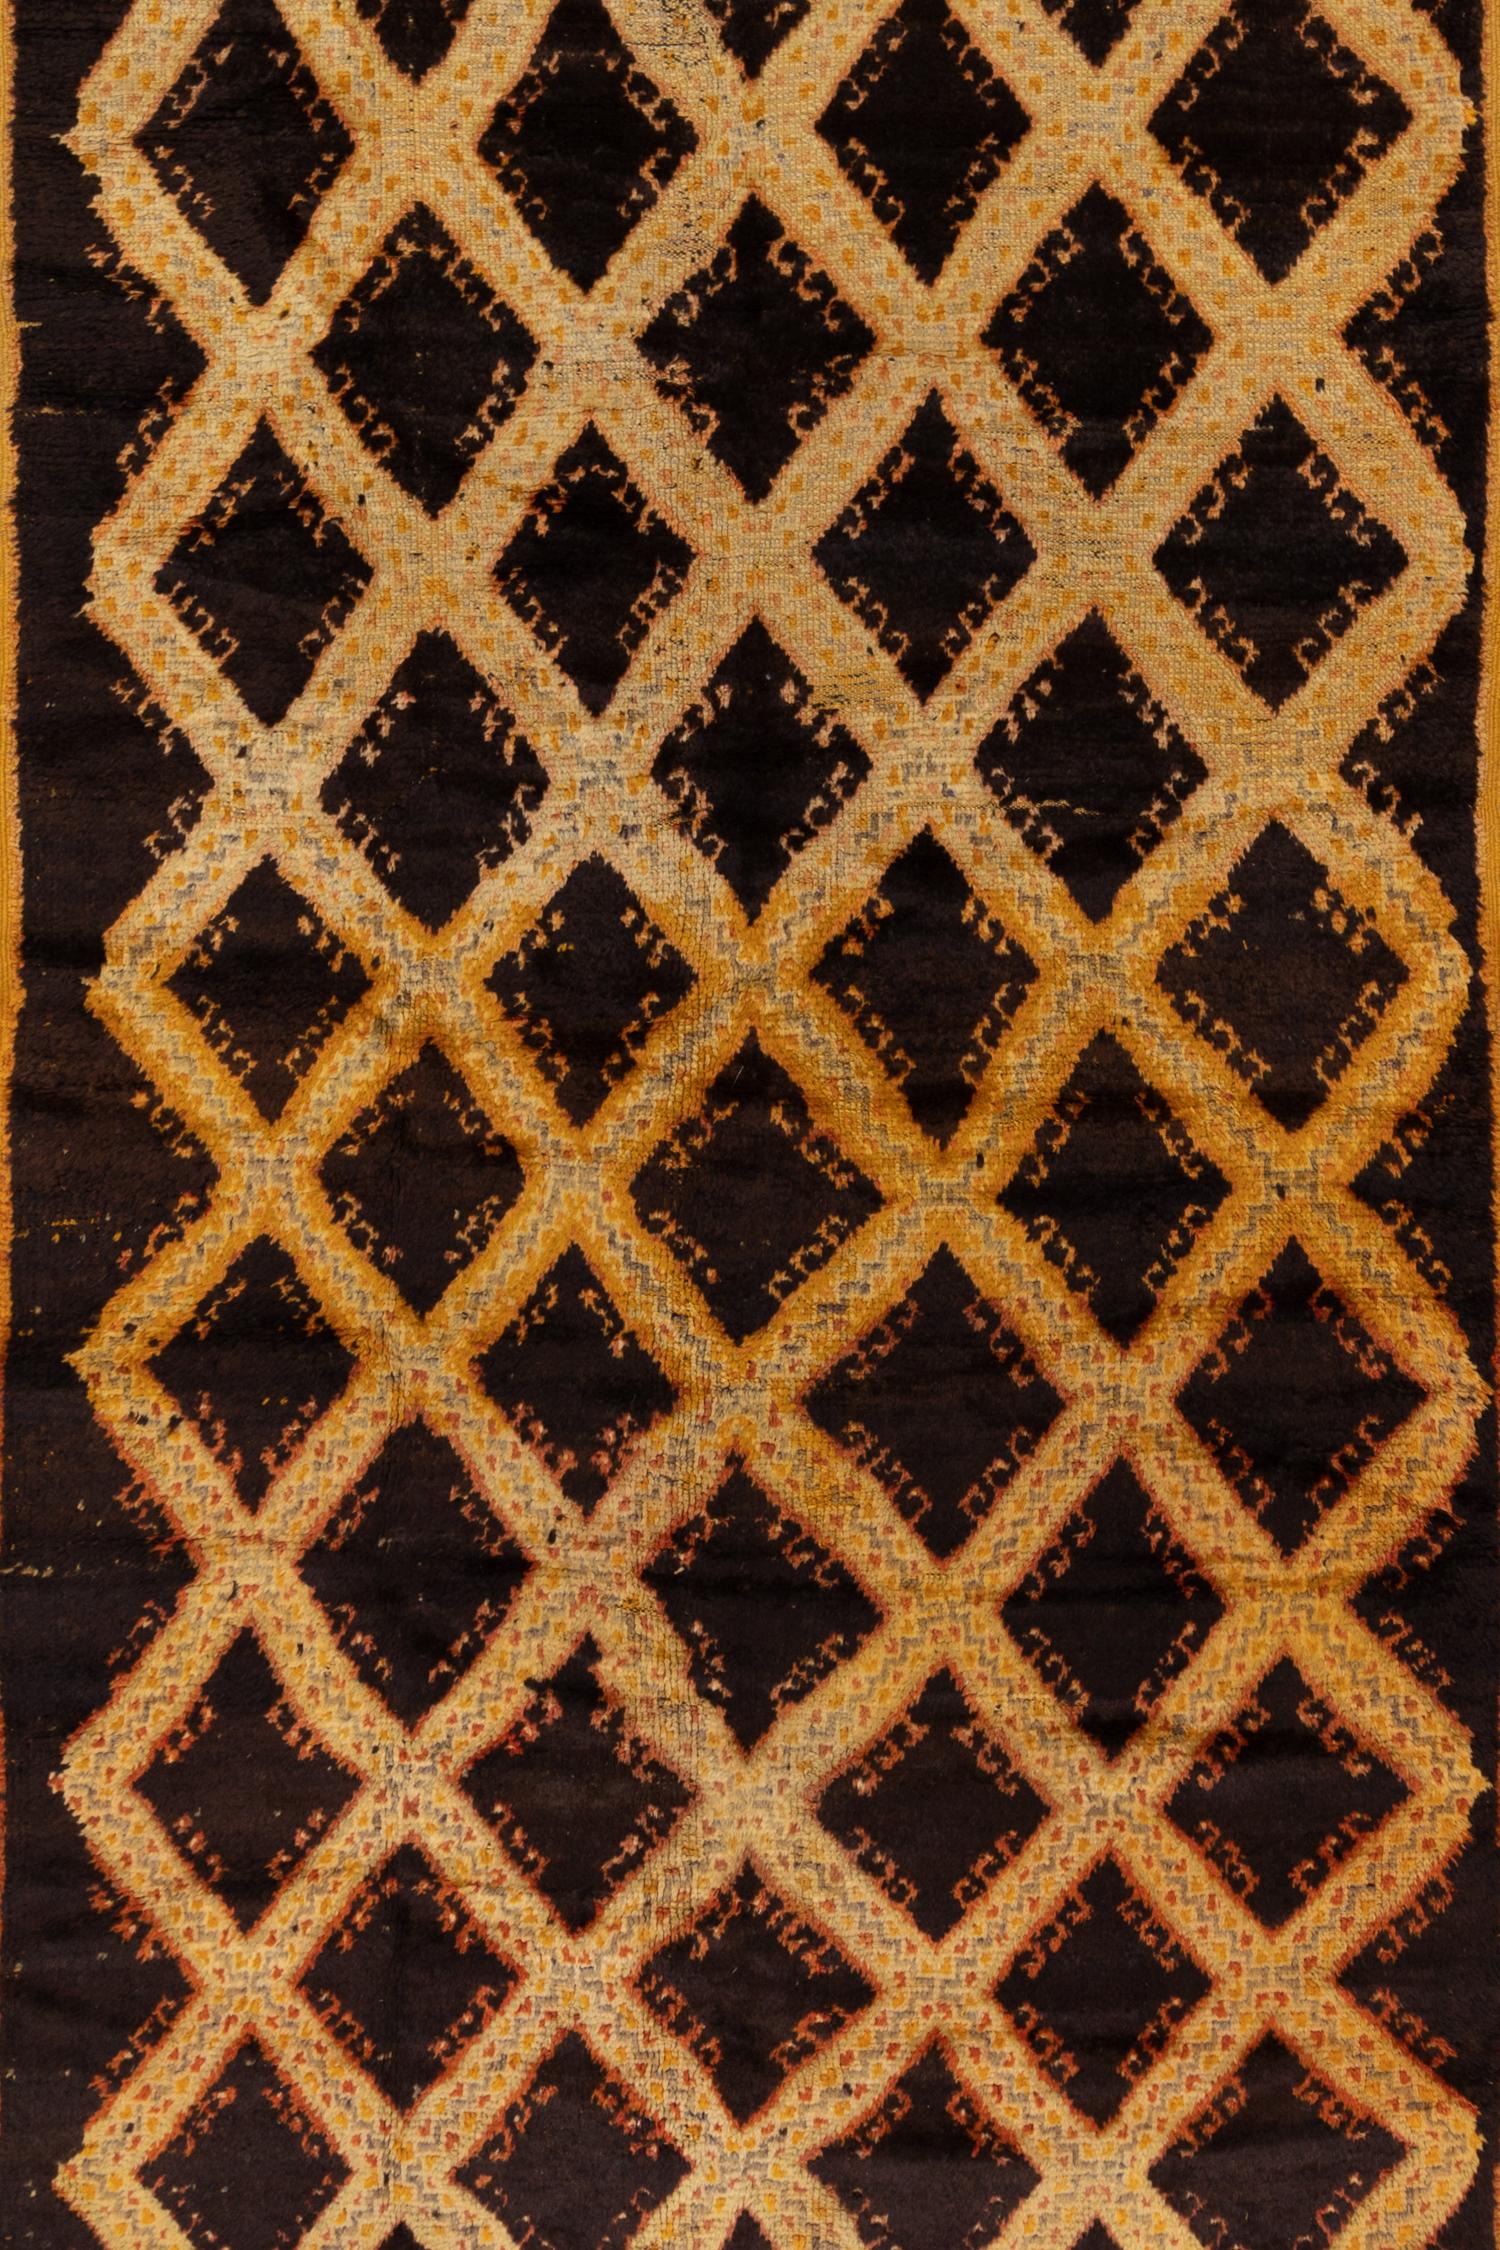 Old and collectible in an unusually large size, excellent example of an original Taznakht rug.

Wear Guide: 2

Wear Notes:
Vintage and antique rugs are by nature, pre-loved and may show evidence of their past. There are varying degrees of wear